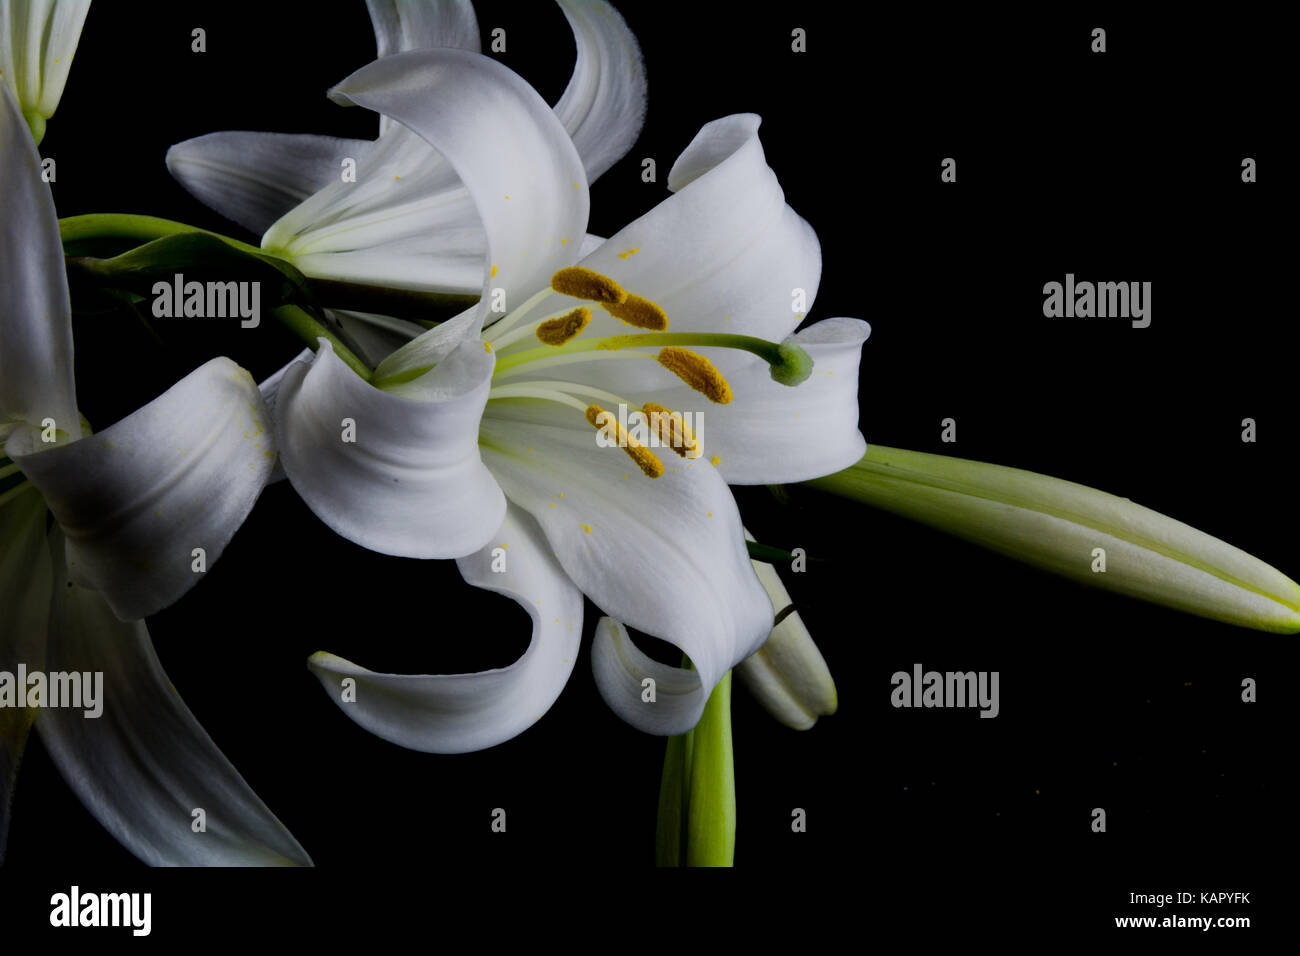 Flowers and buds of lilies on a black background Stock Photo